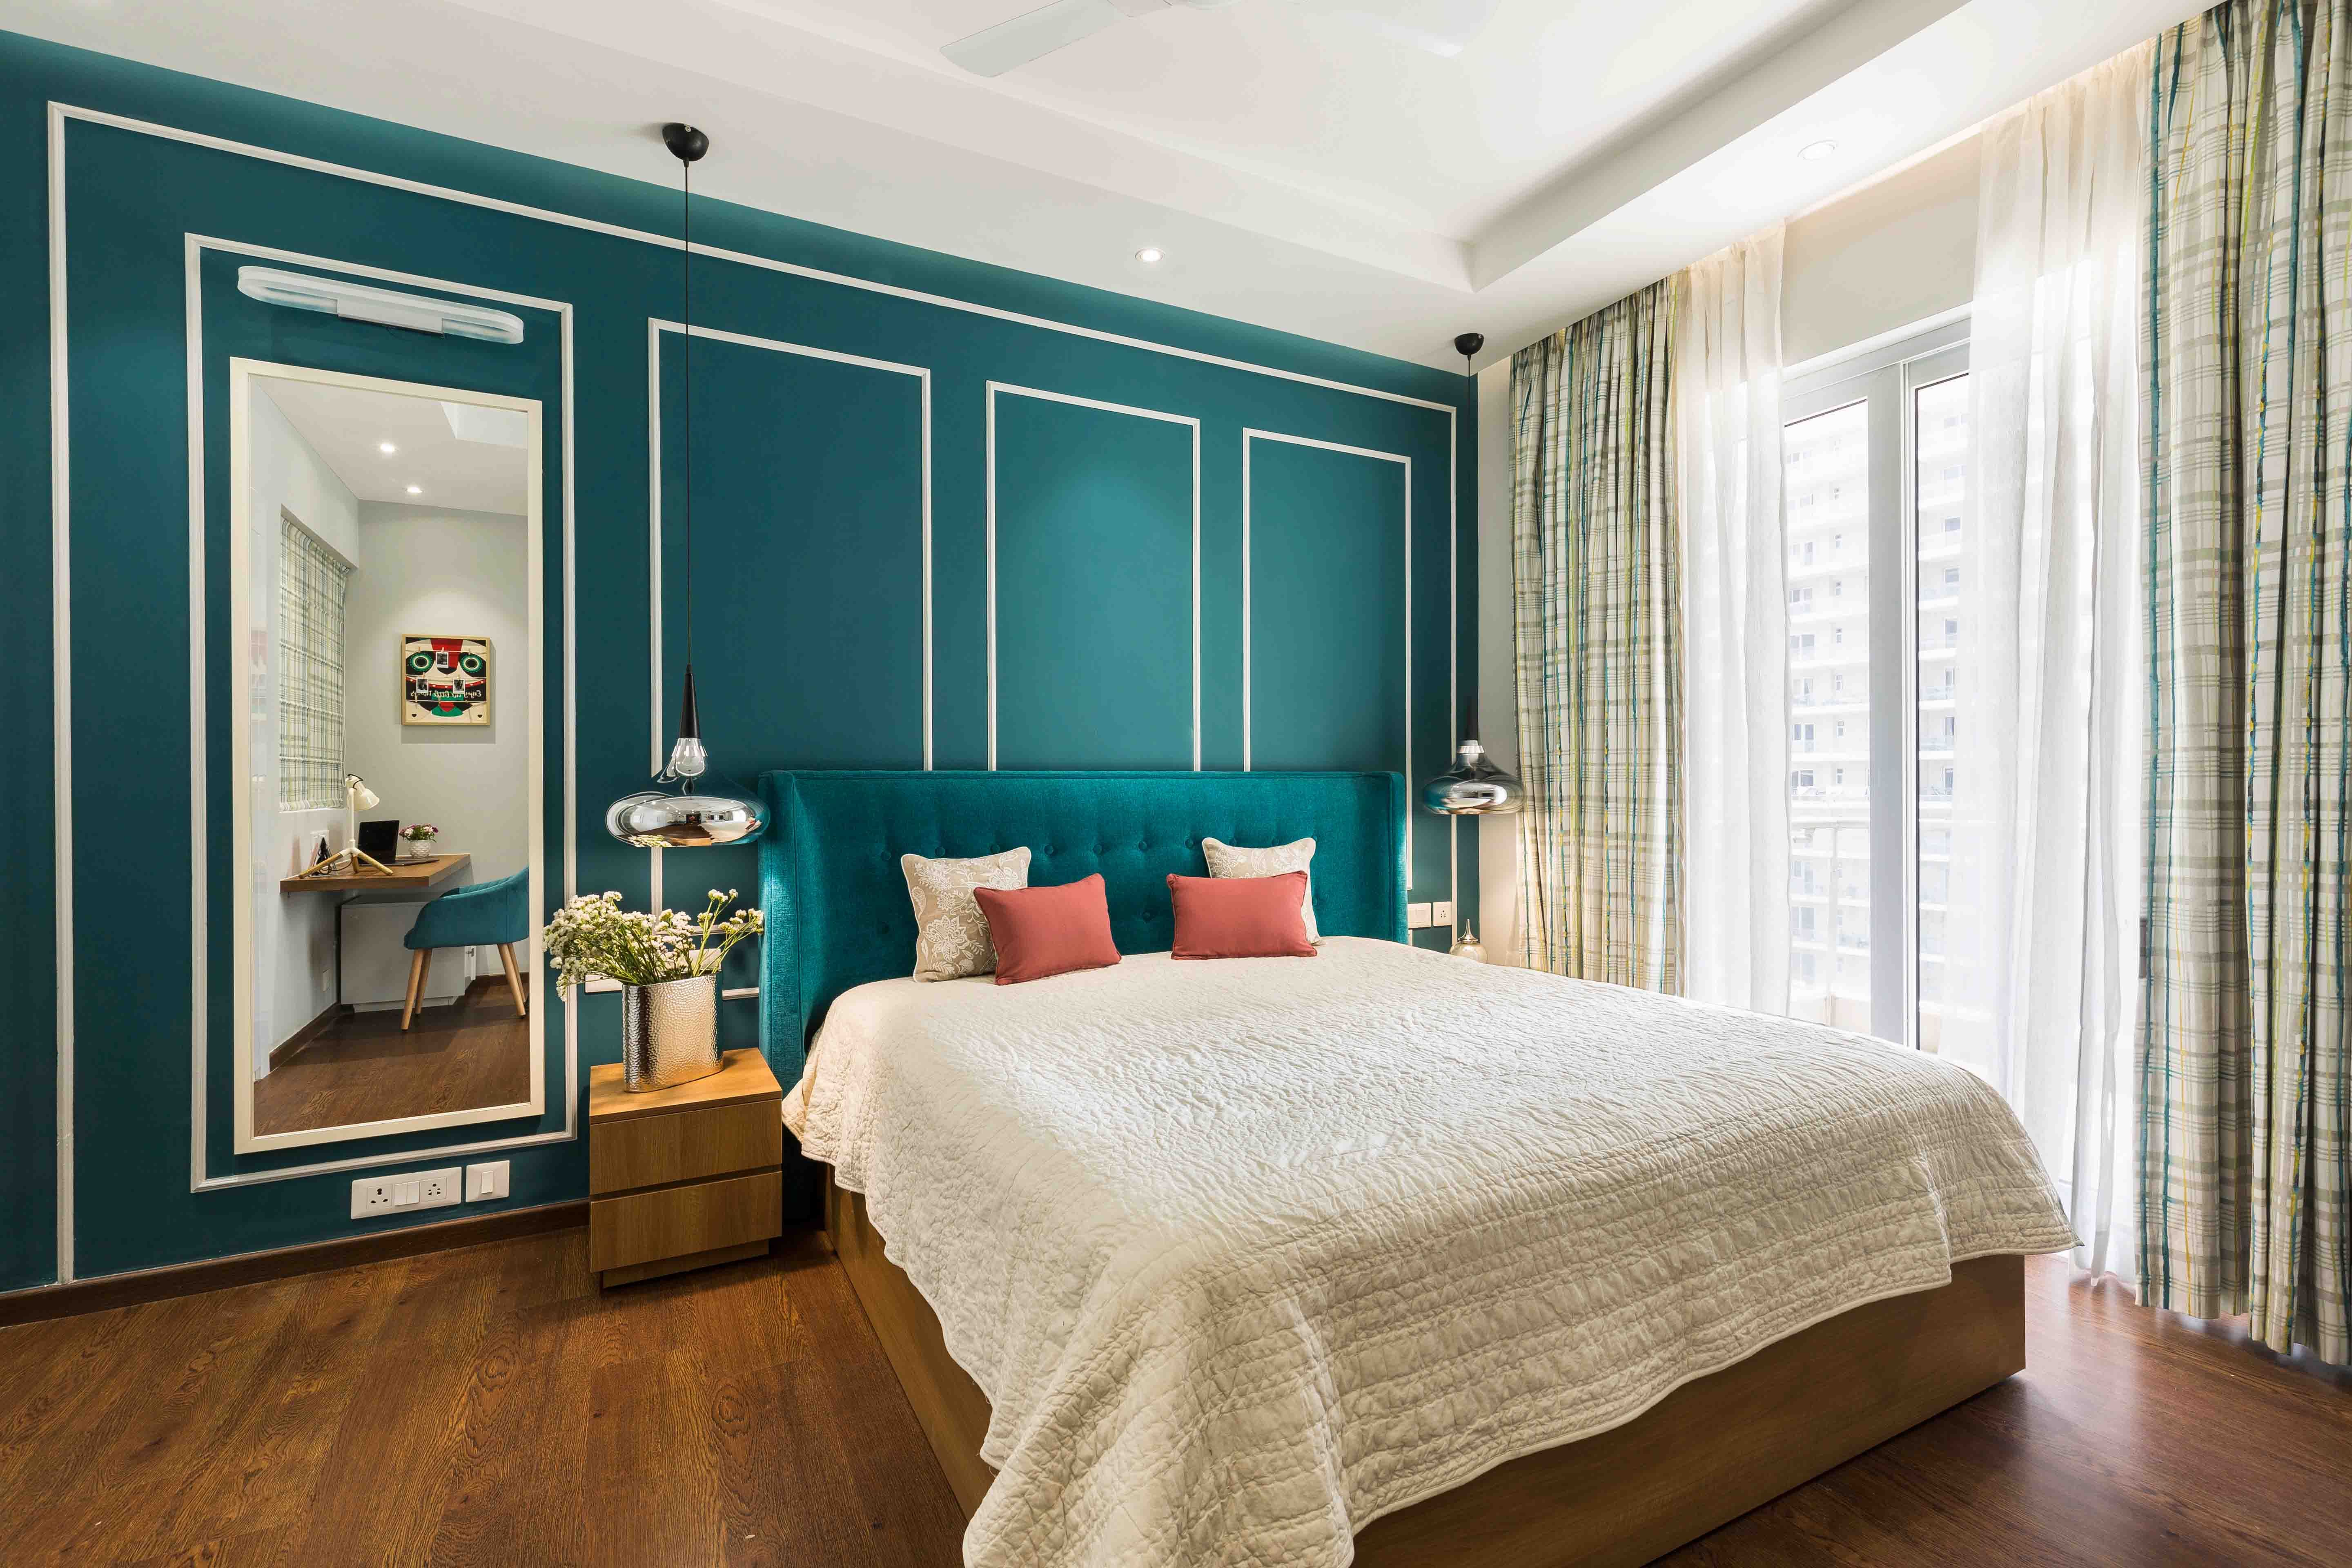 Modern Master Bedroom Design With Teal Blue Accent Wall And White Wall Trims